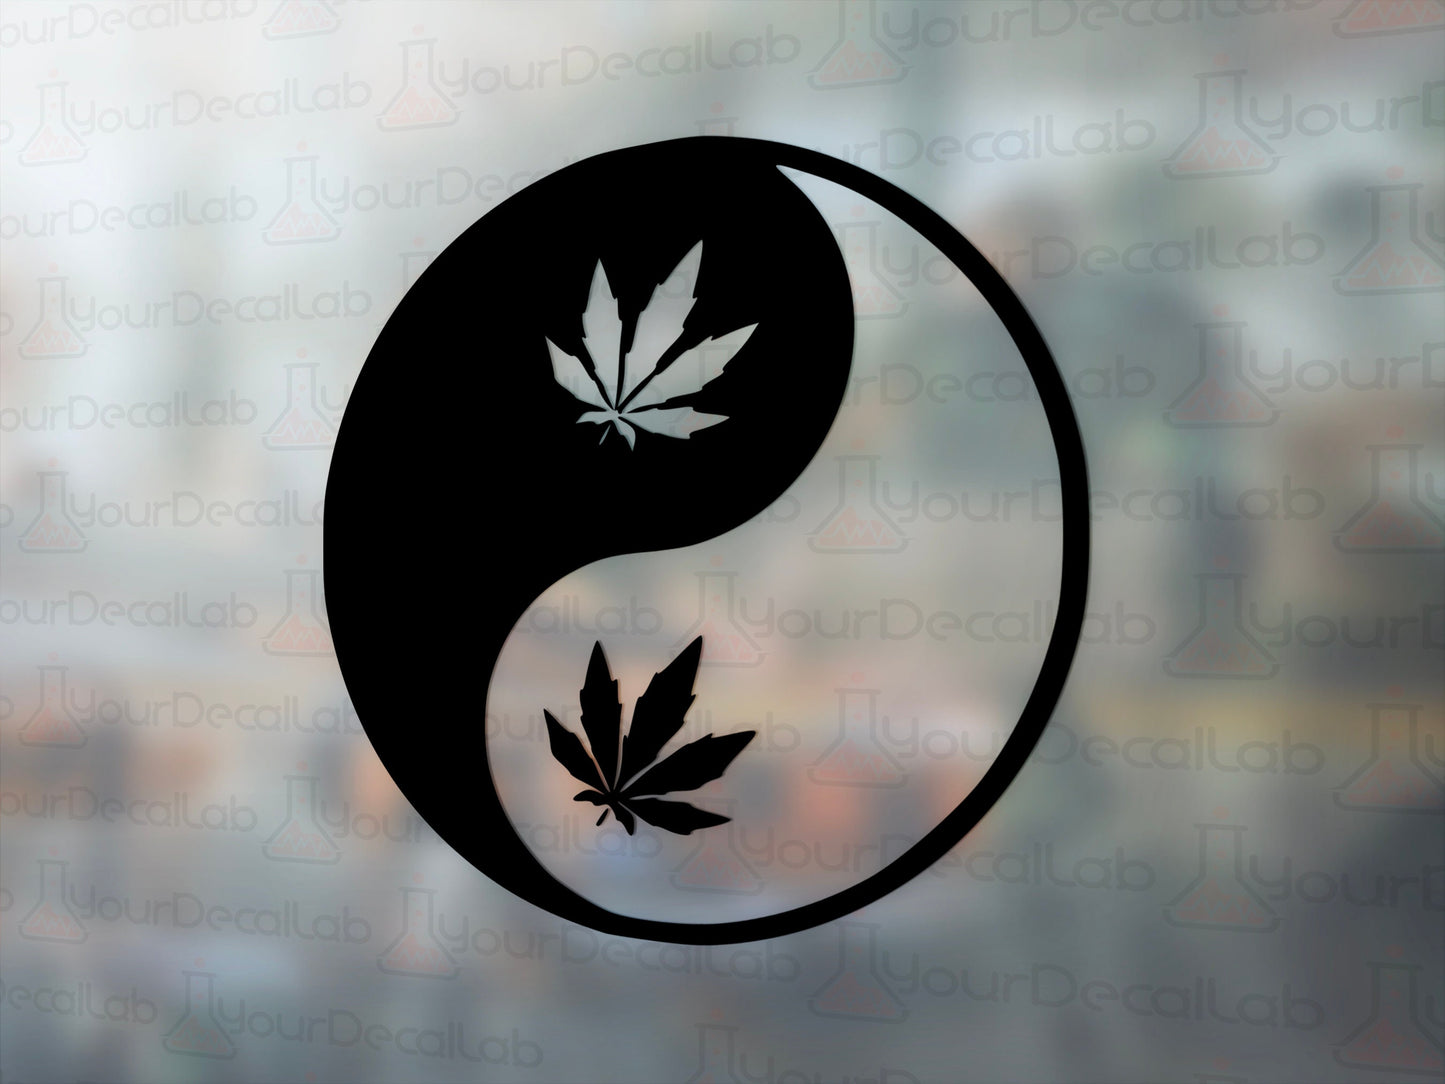 Weed Peace Decal - Many Colors & Sizes